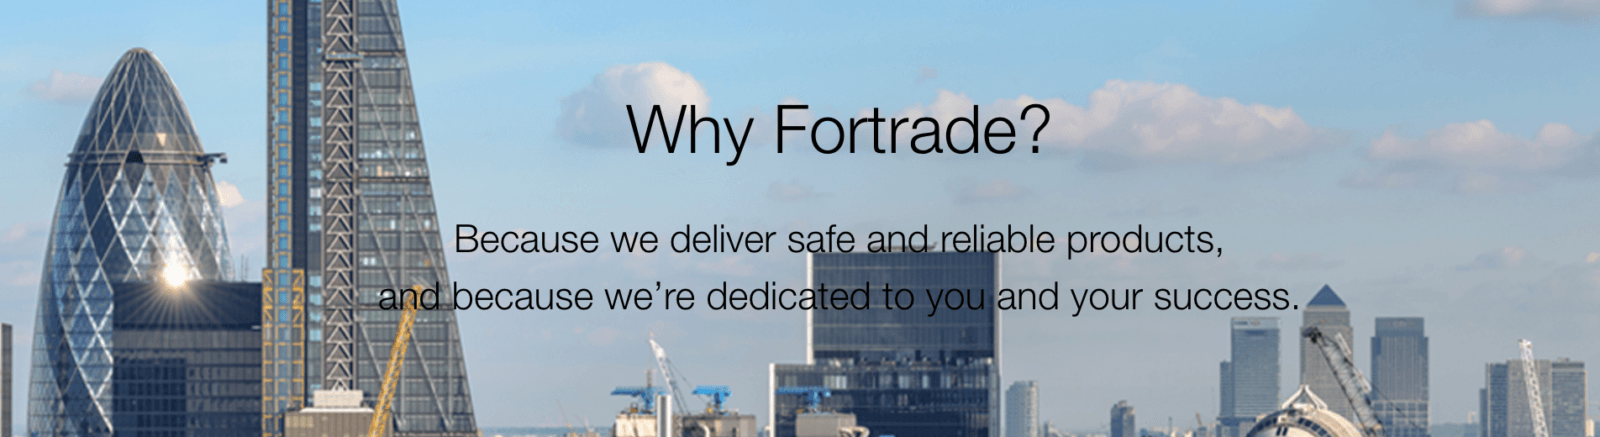 ForTrade Review 2019-2020 — Is ForTrade.com Scam or Legit?